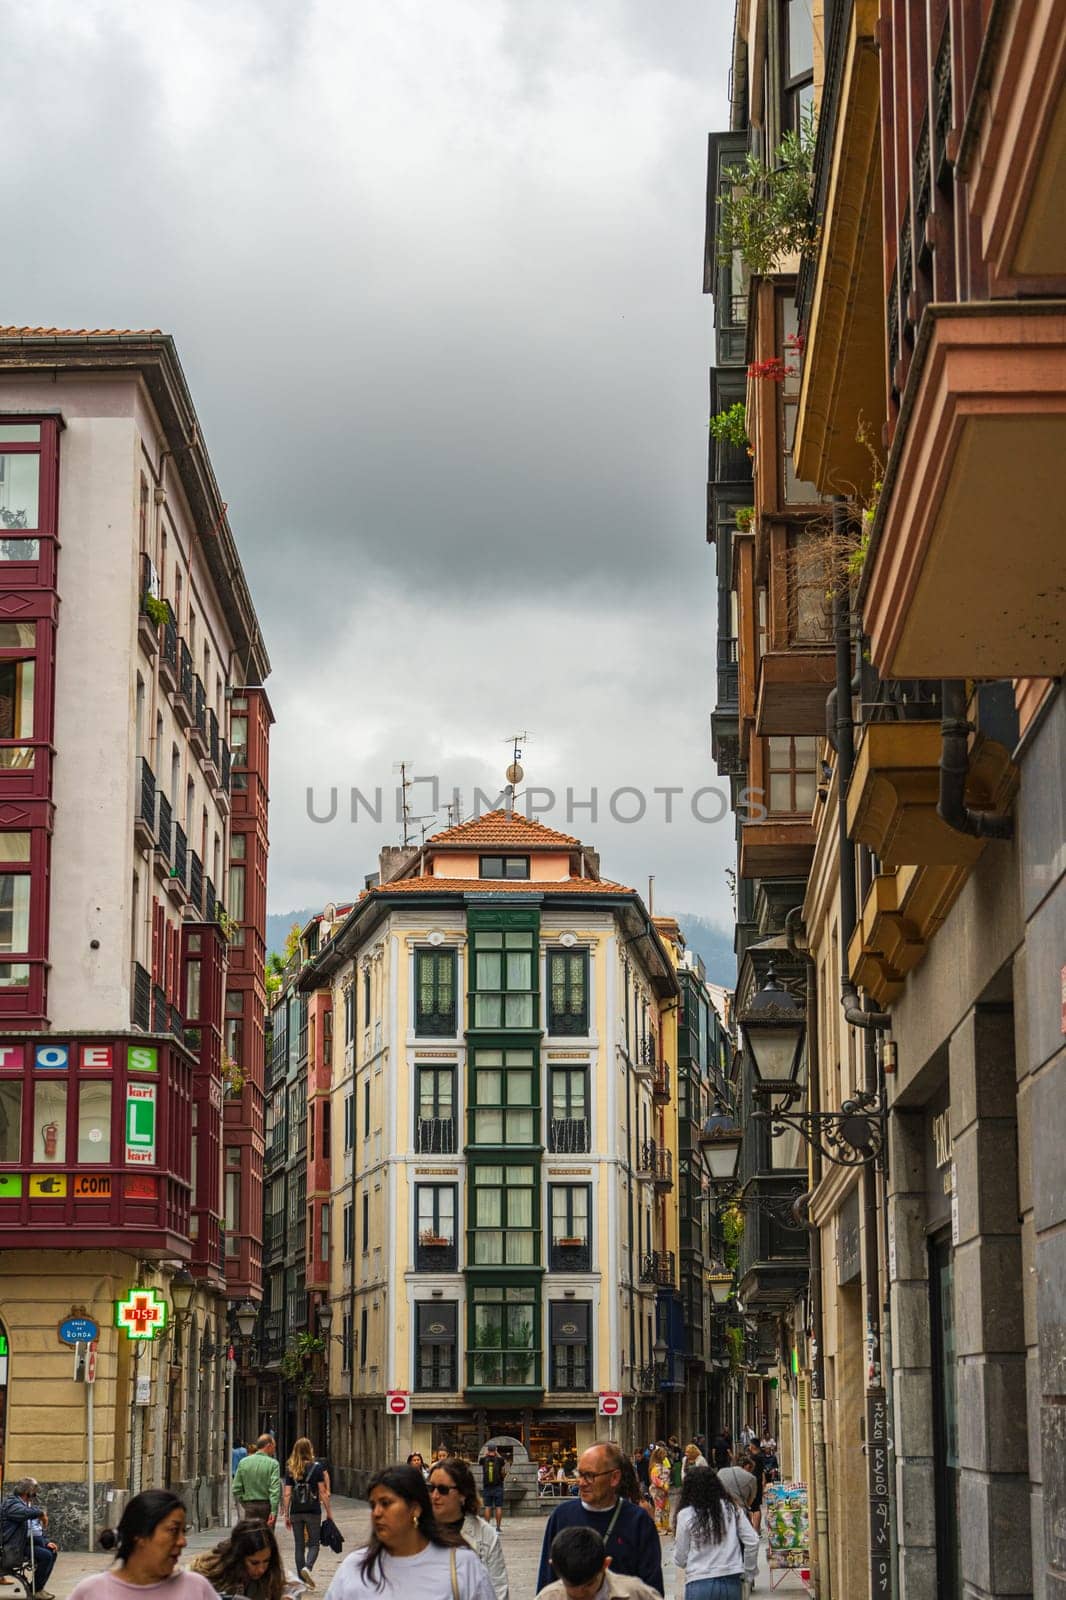 Bilbao, Basque Country, Spain - 10.06.2022: People stroll through the narrow streets of Bilbao